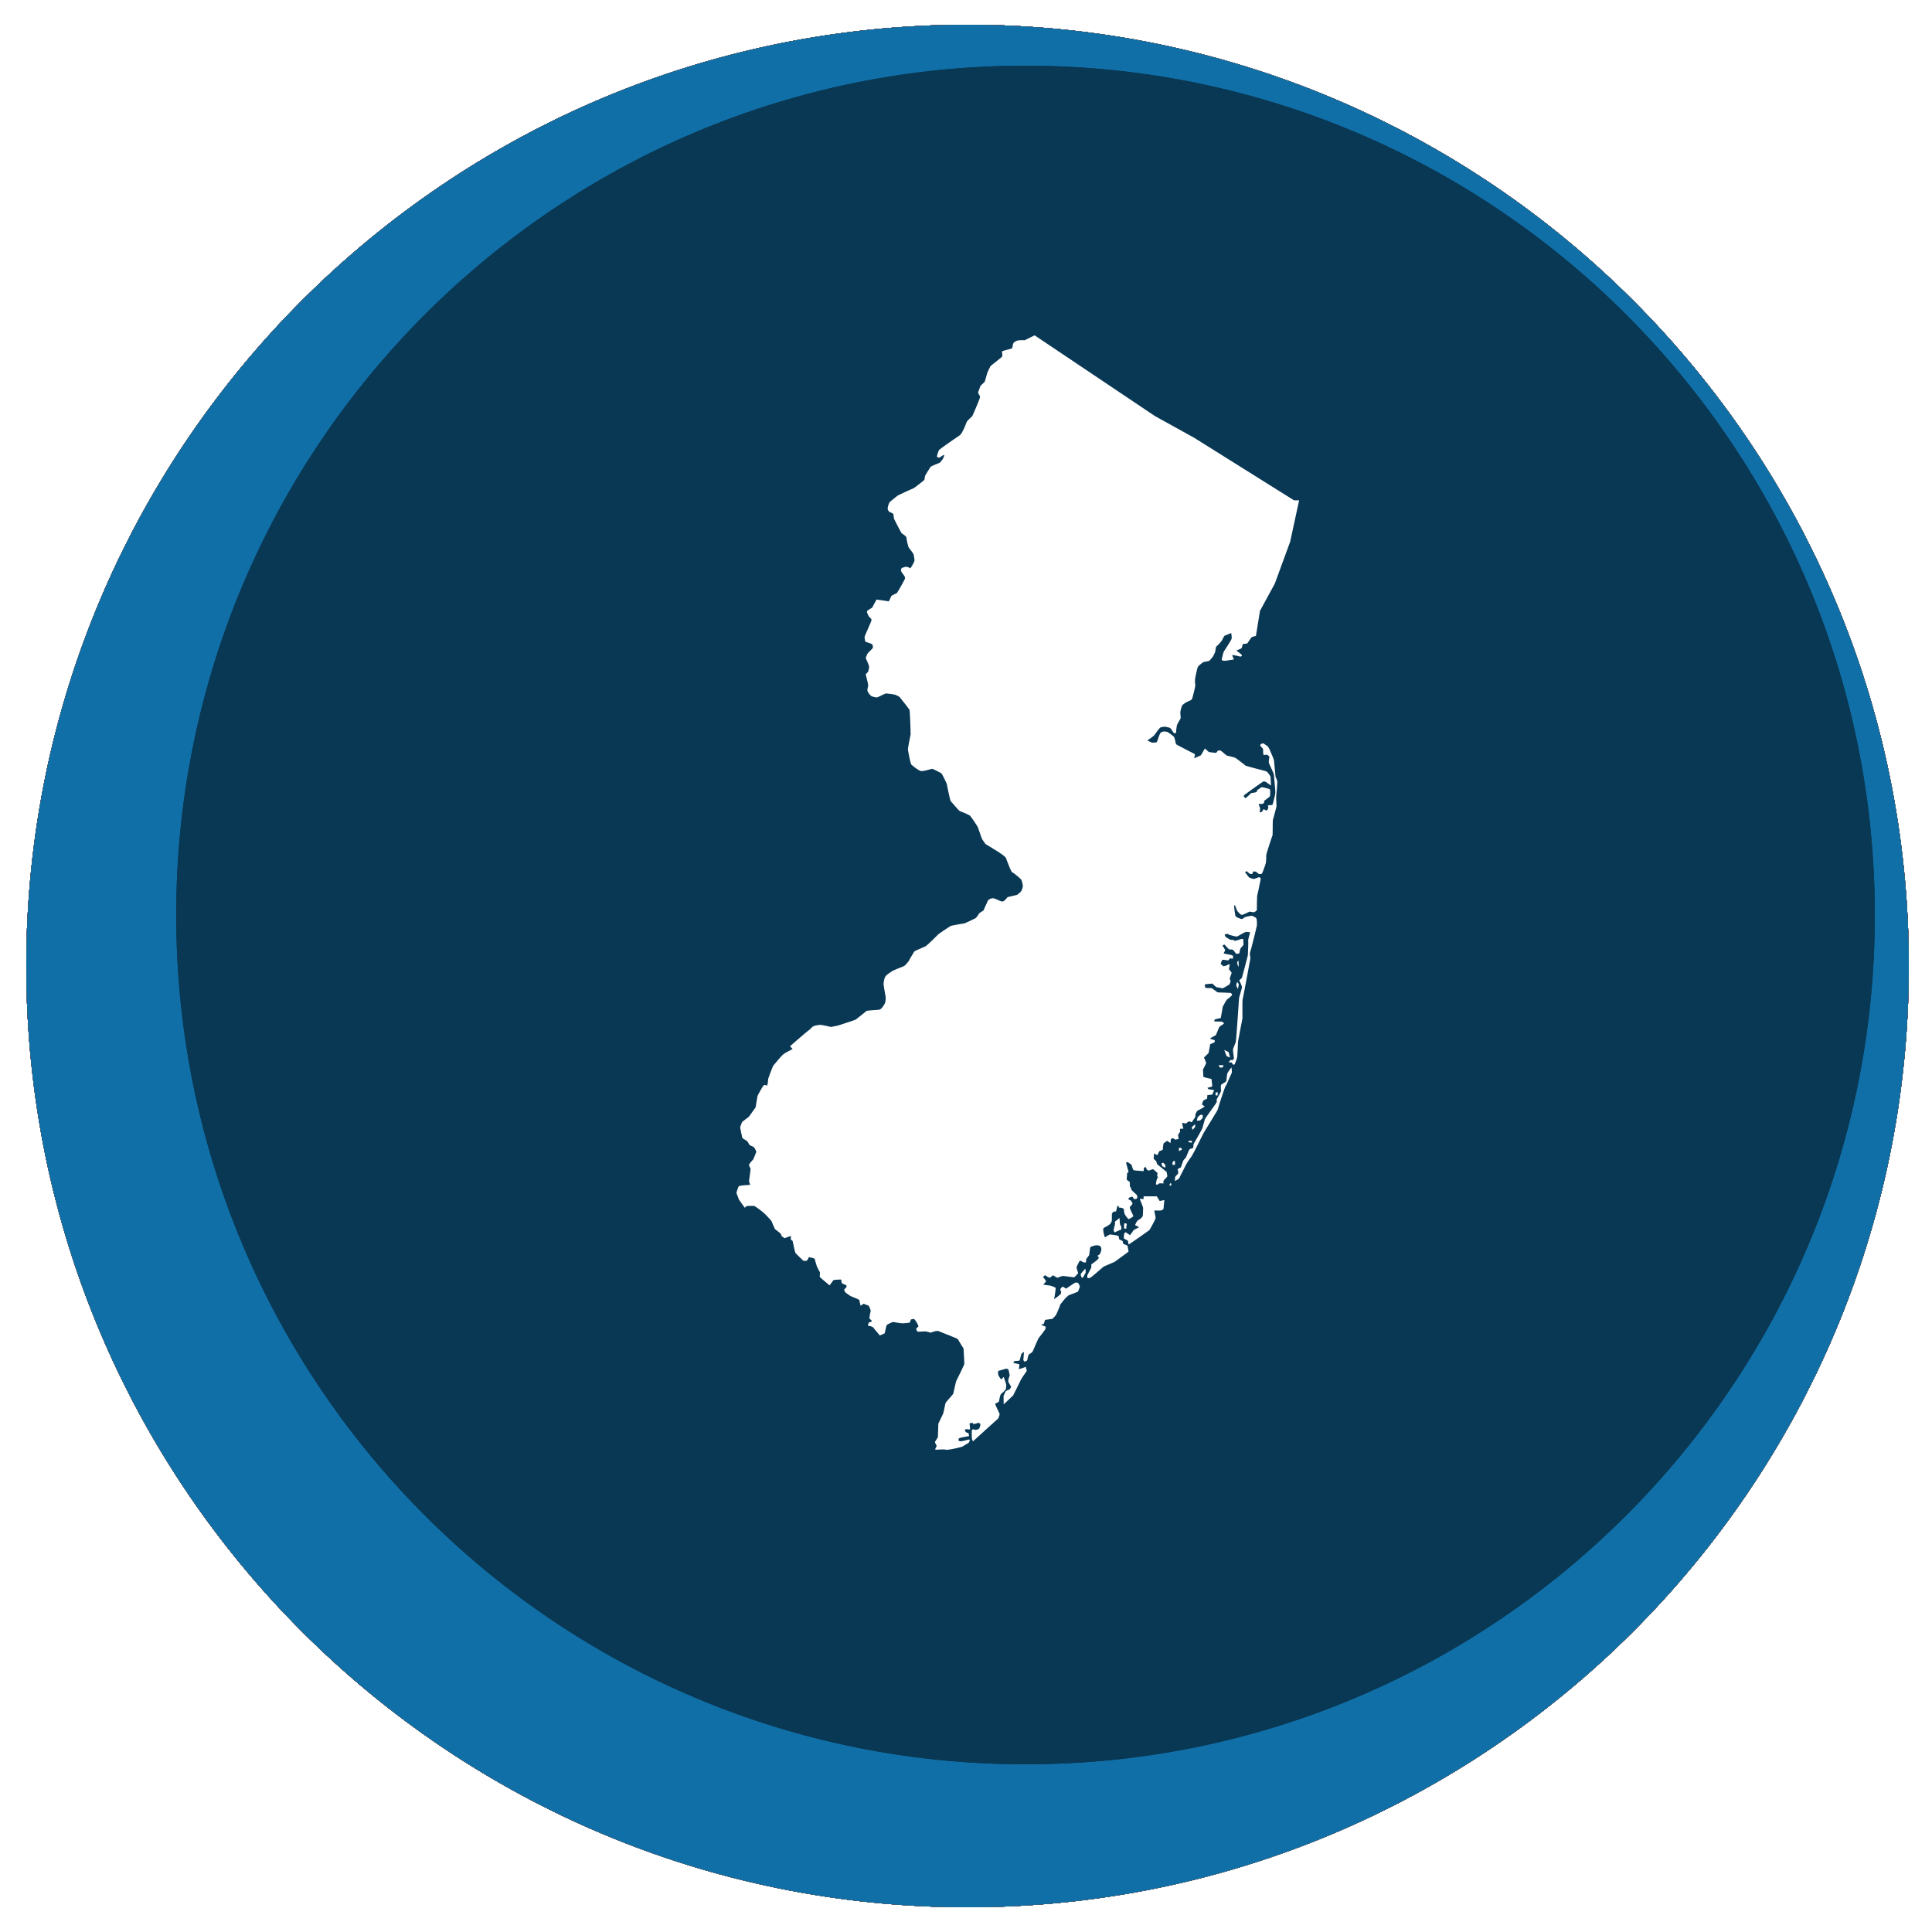 New Jersey state shape in a circle